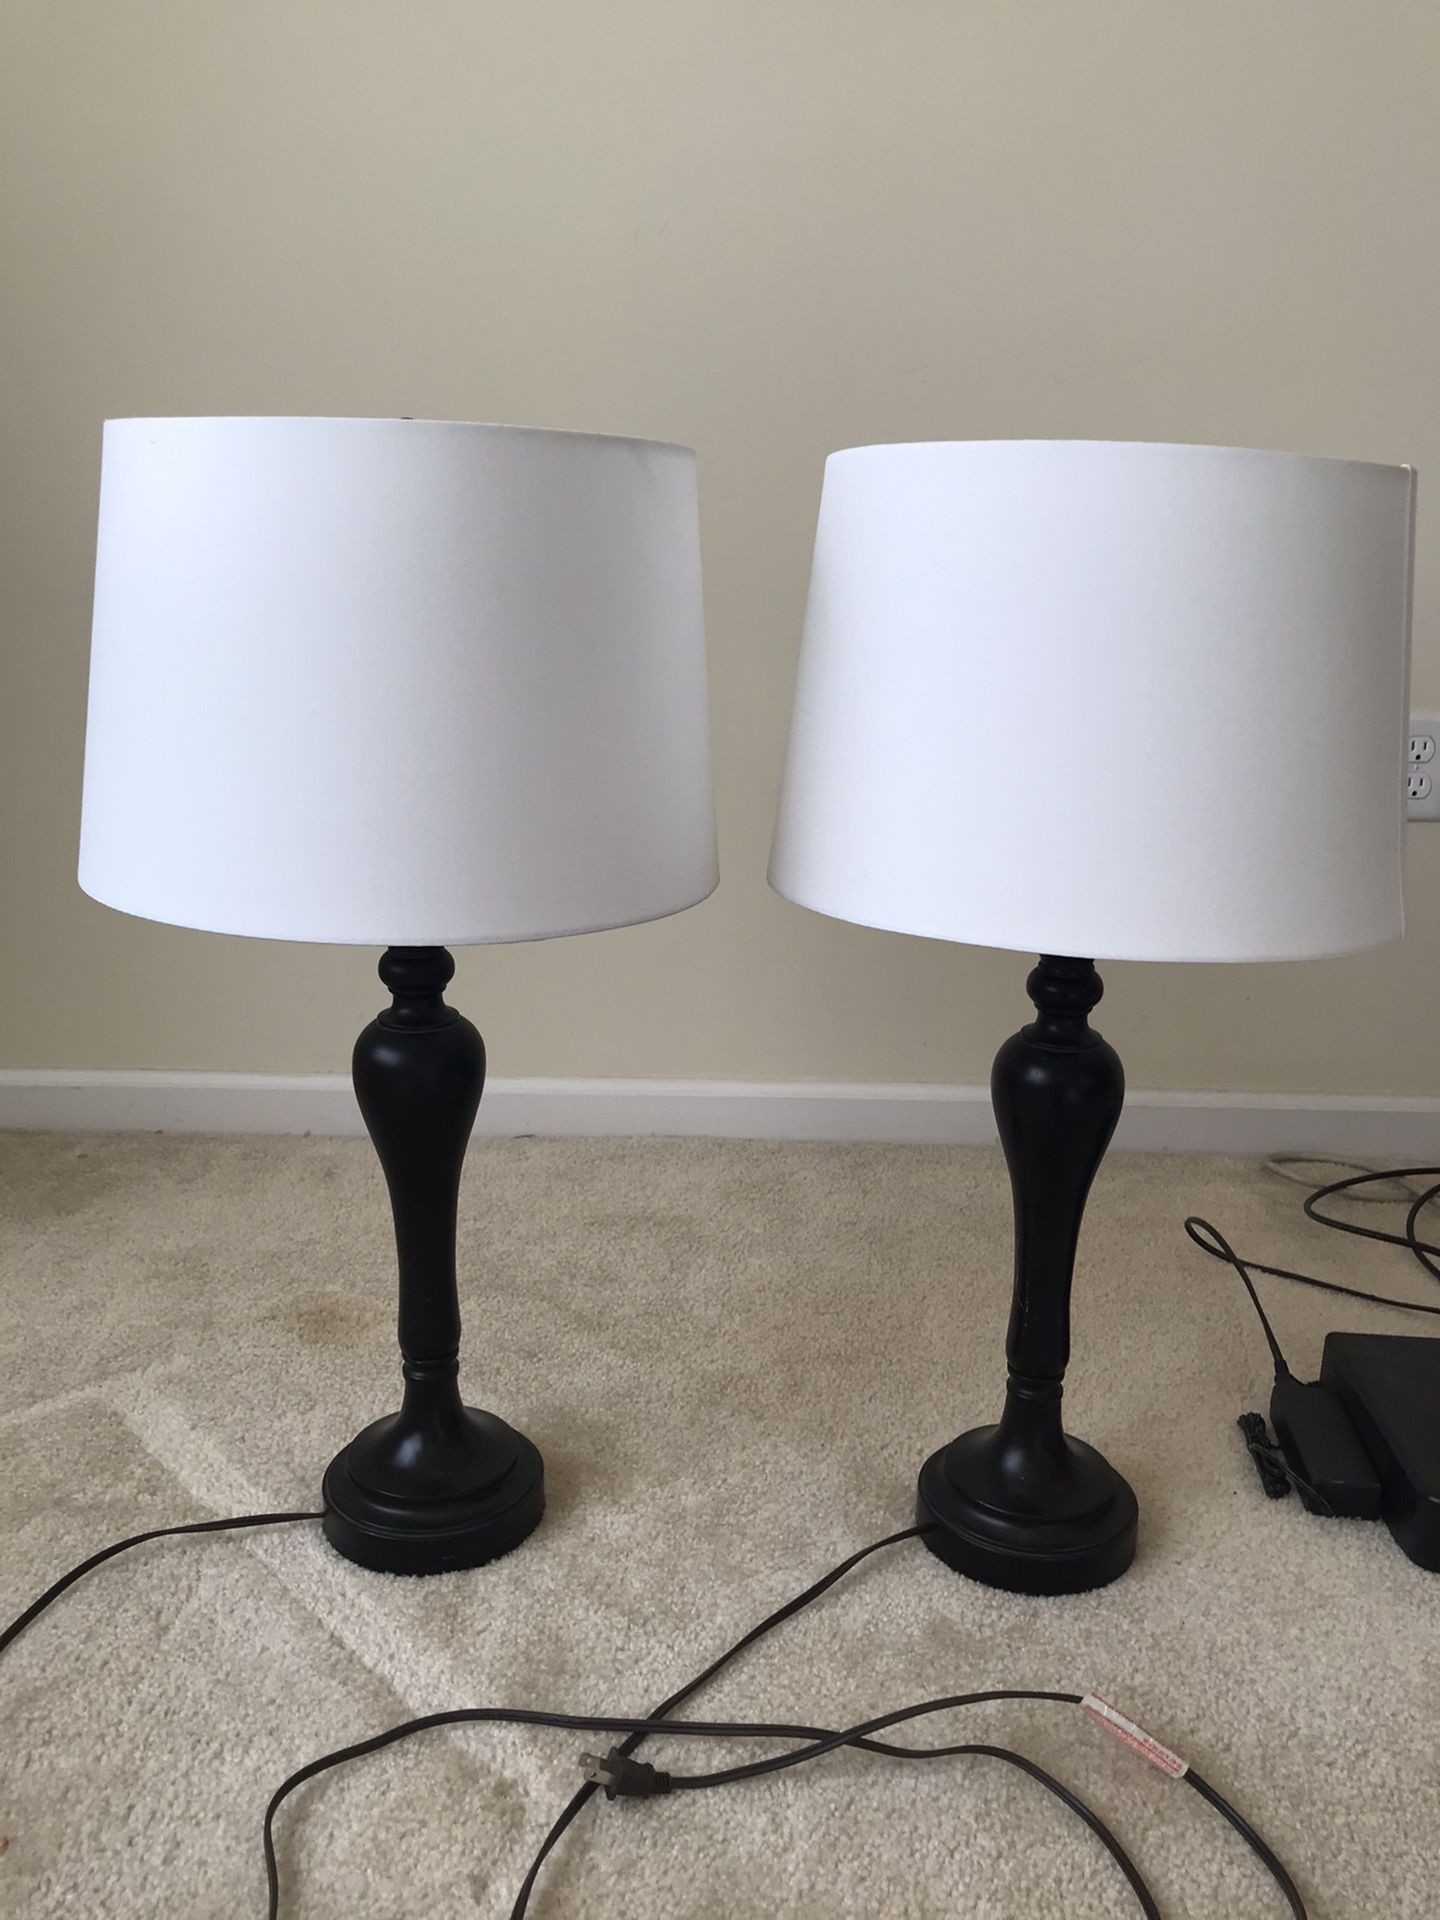 Two espresso table lamps